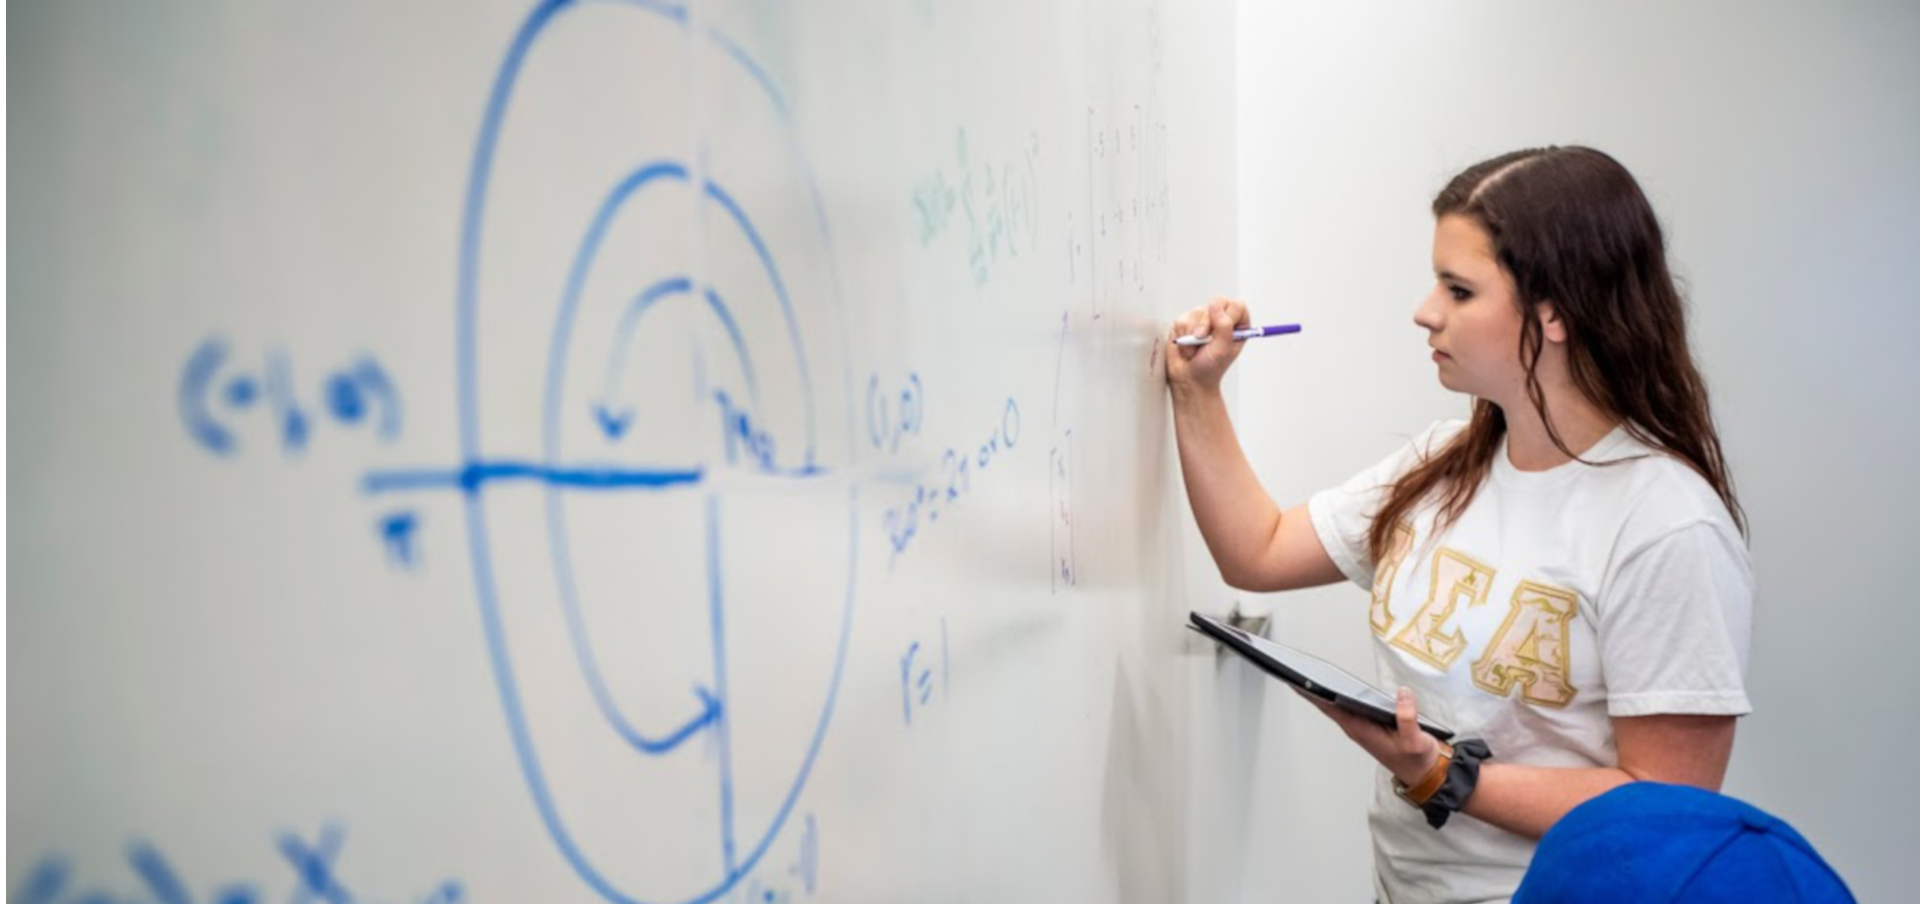 A student works a problem on a whiteboard